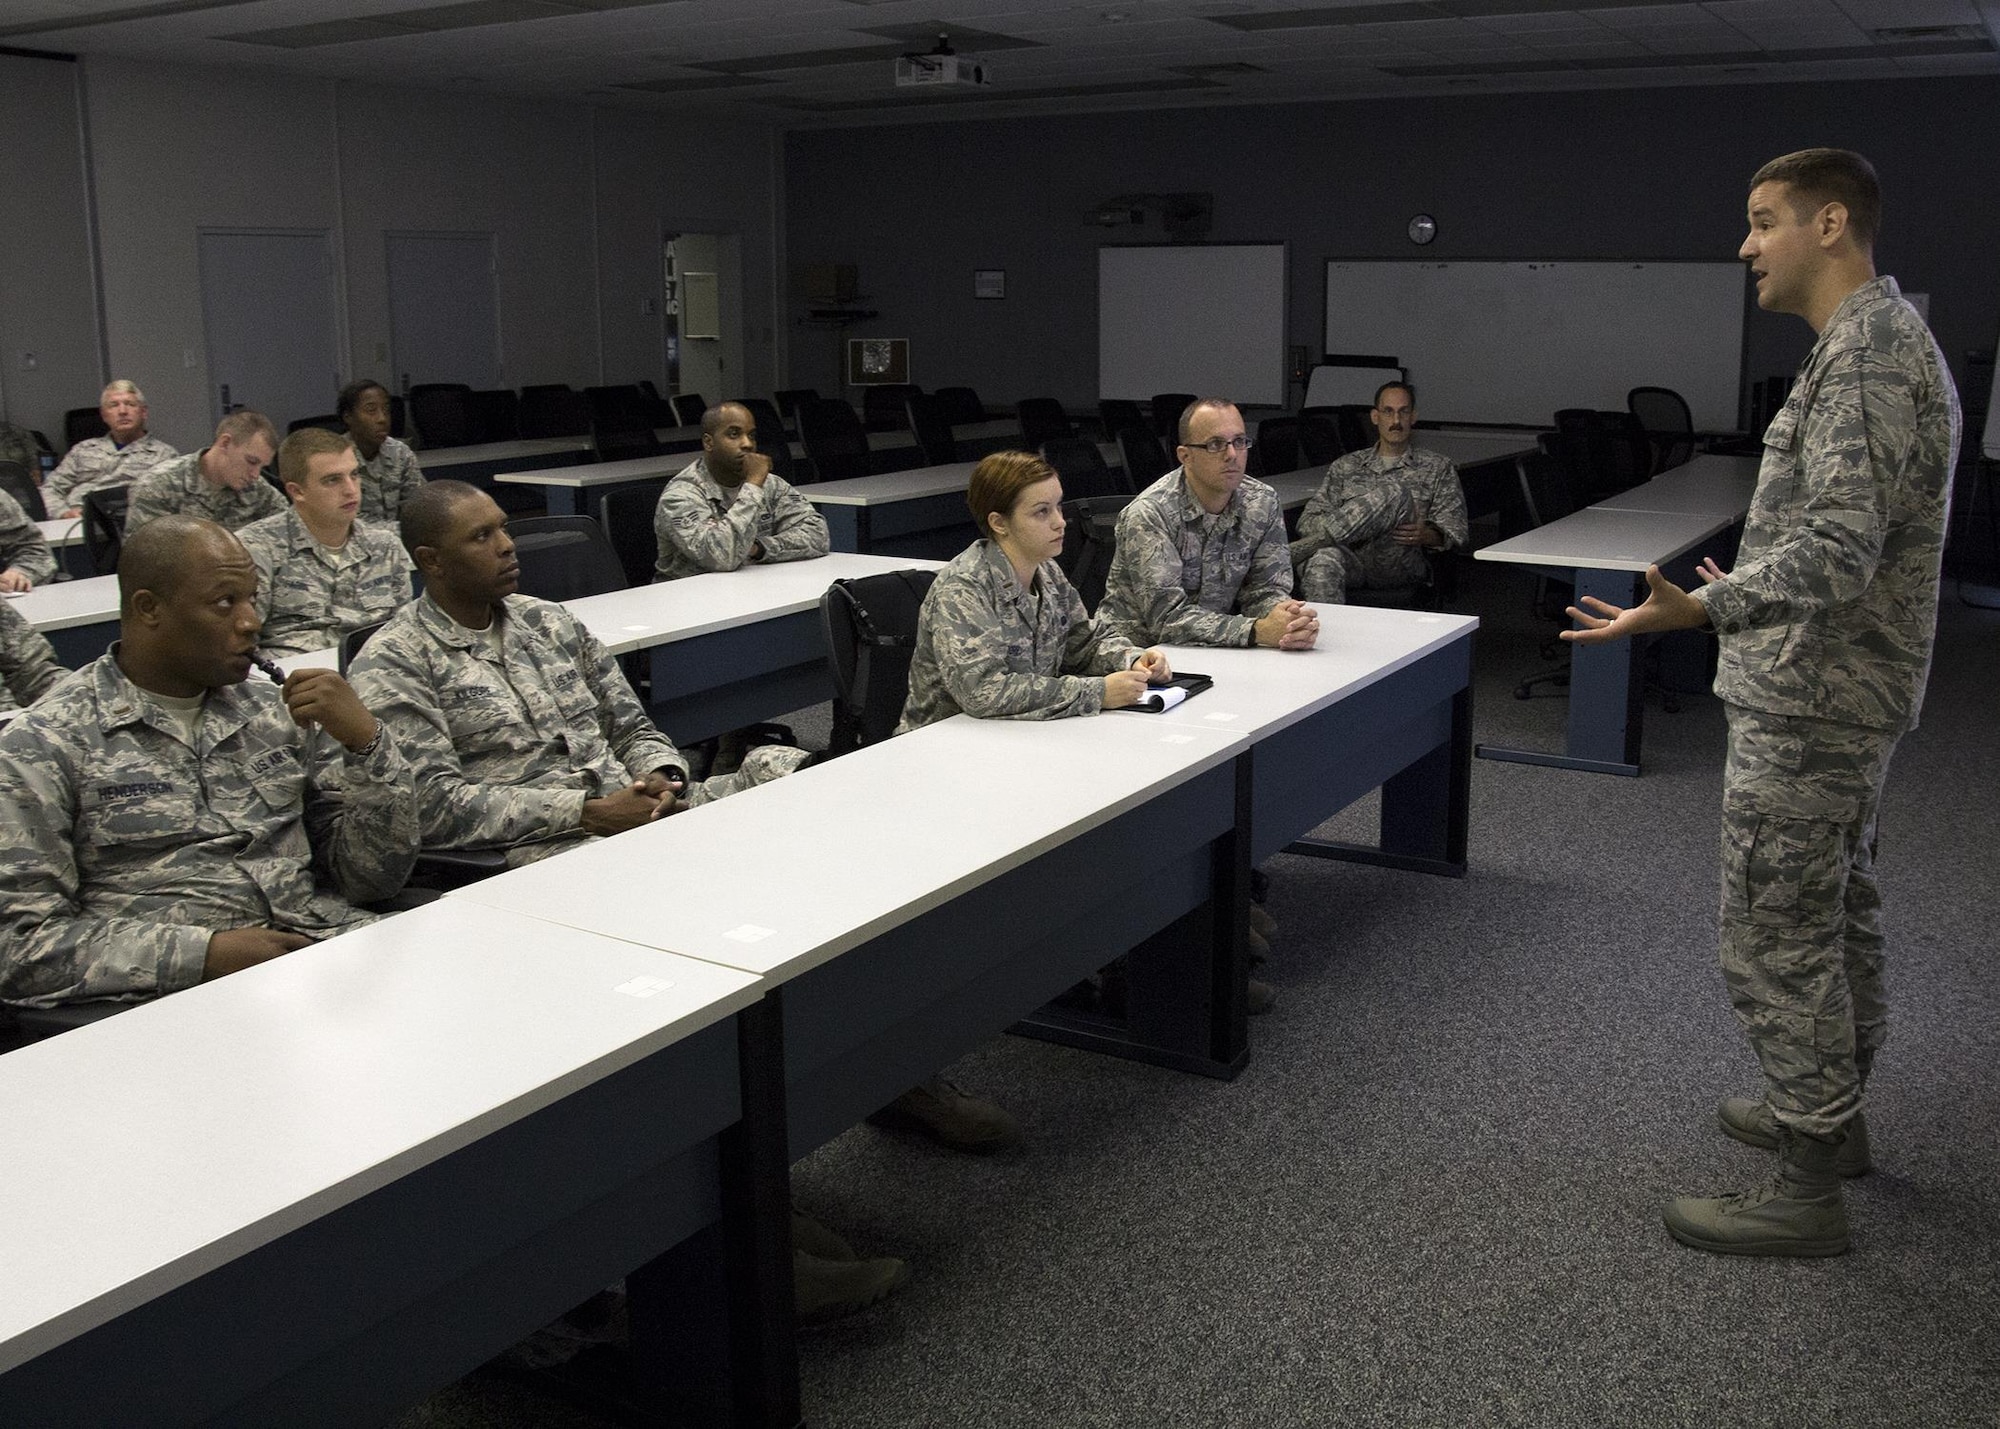 Maj. Adam Fink, 315th Airlift Wing Chaplain Service, tells a group of Air Force chaplain candidates about the many rewarding opportunities available to them as chaplains in the Air Force Reserve. The 315th Airlift Wing Chaplain Service hosted the 18 second lieutenants in an effort to bring the young officers out into the “real Air Force world,” and  show them the diversity of people and job specialties at a typical Air Force base.  Besides meeting Reserve and active duty Airmen around the base, the group also visited patients at the Charleston VA Medical Center. Over the weekend they were scheduled to participate in the Joint Base Charleston Chapel services with active duty chaplains on the main base and over at the Naval Weapons Station. Weather permitting, they also hope to get a chance to visit the “Holy Cities” many historical churches before they leave. (U.S. Photo by Michael Dukes)